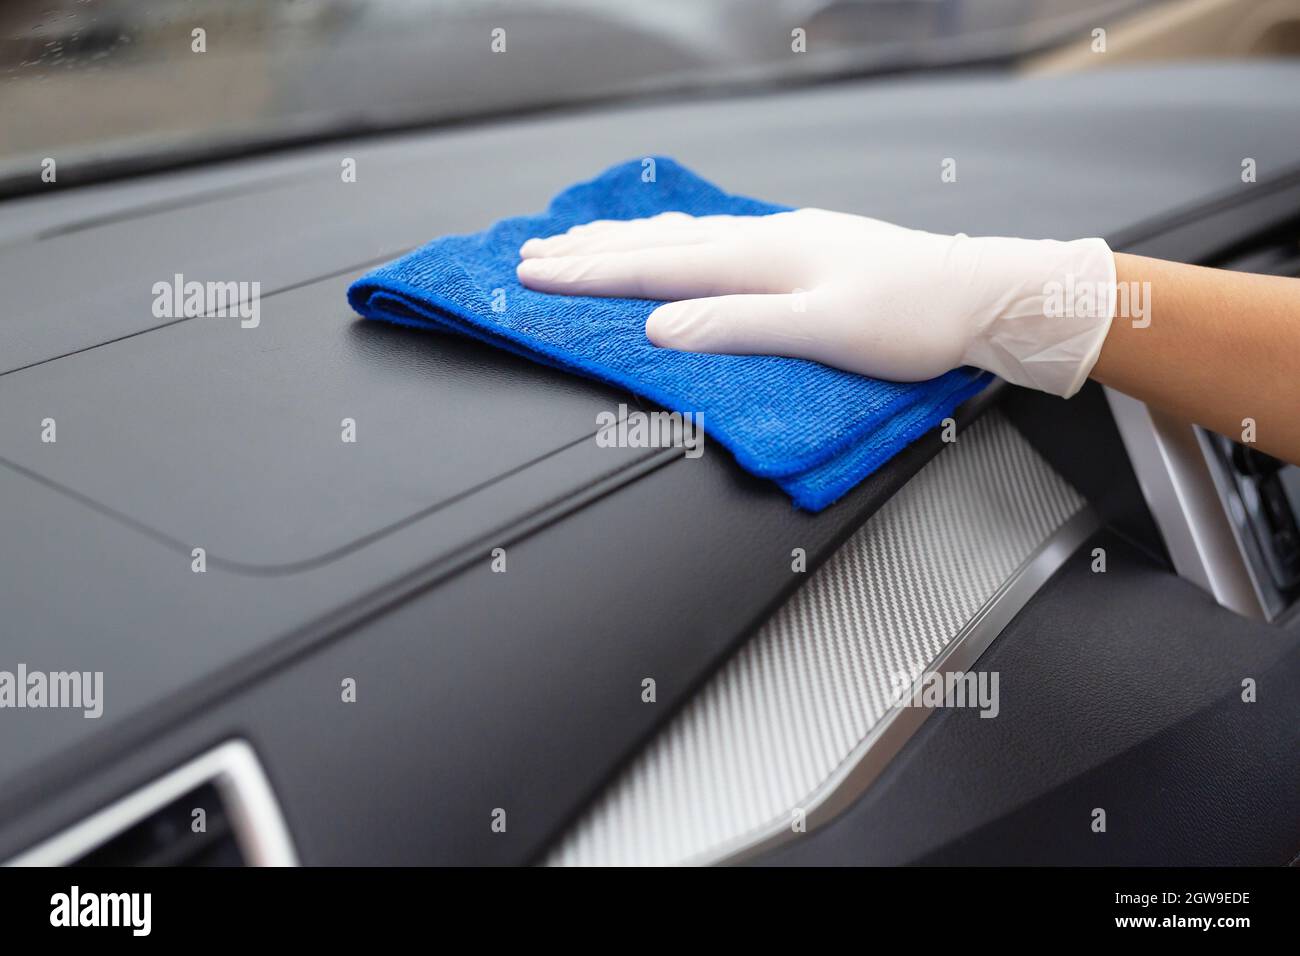 Car Care Workers Wash, Spray And Clean The Car. Stock Photo